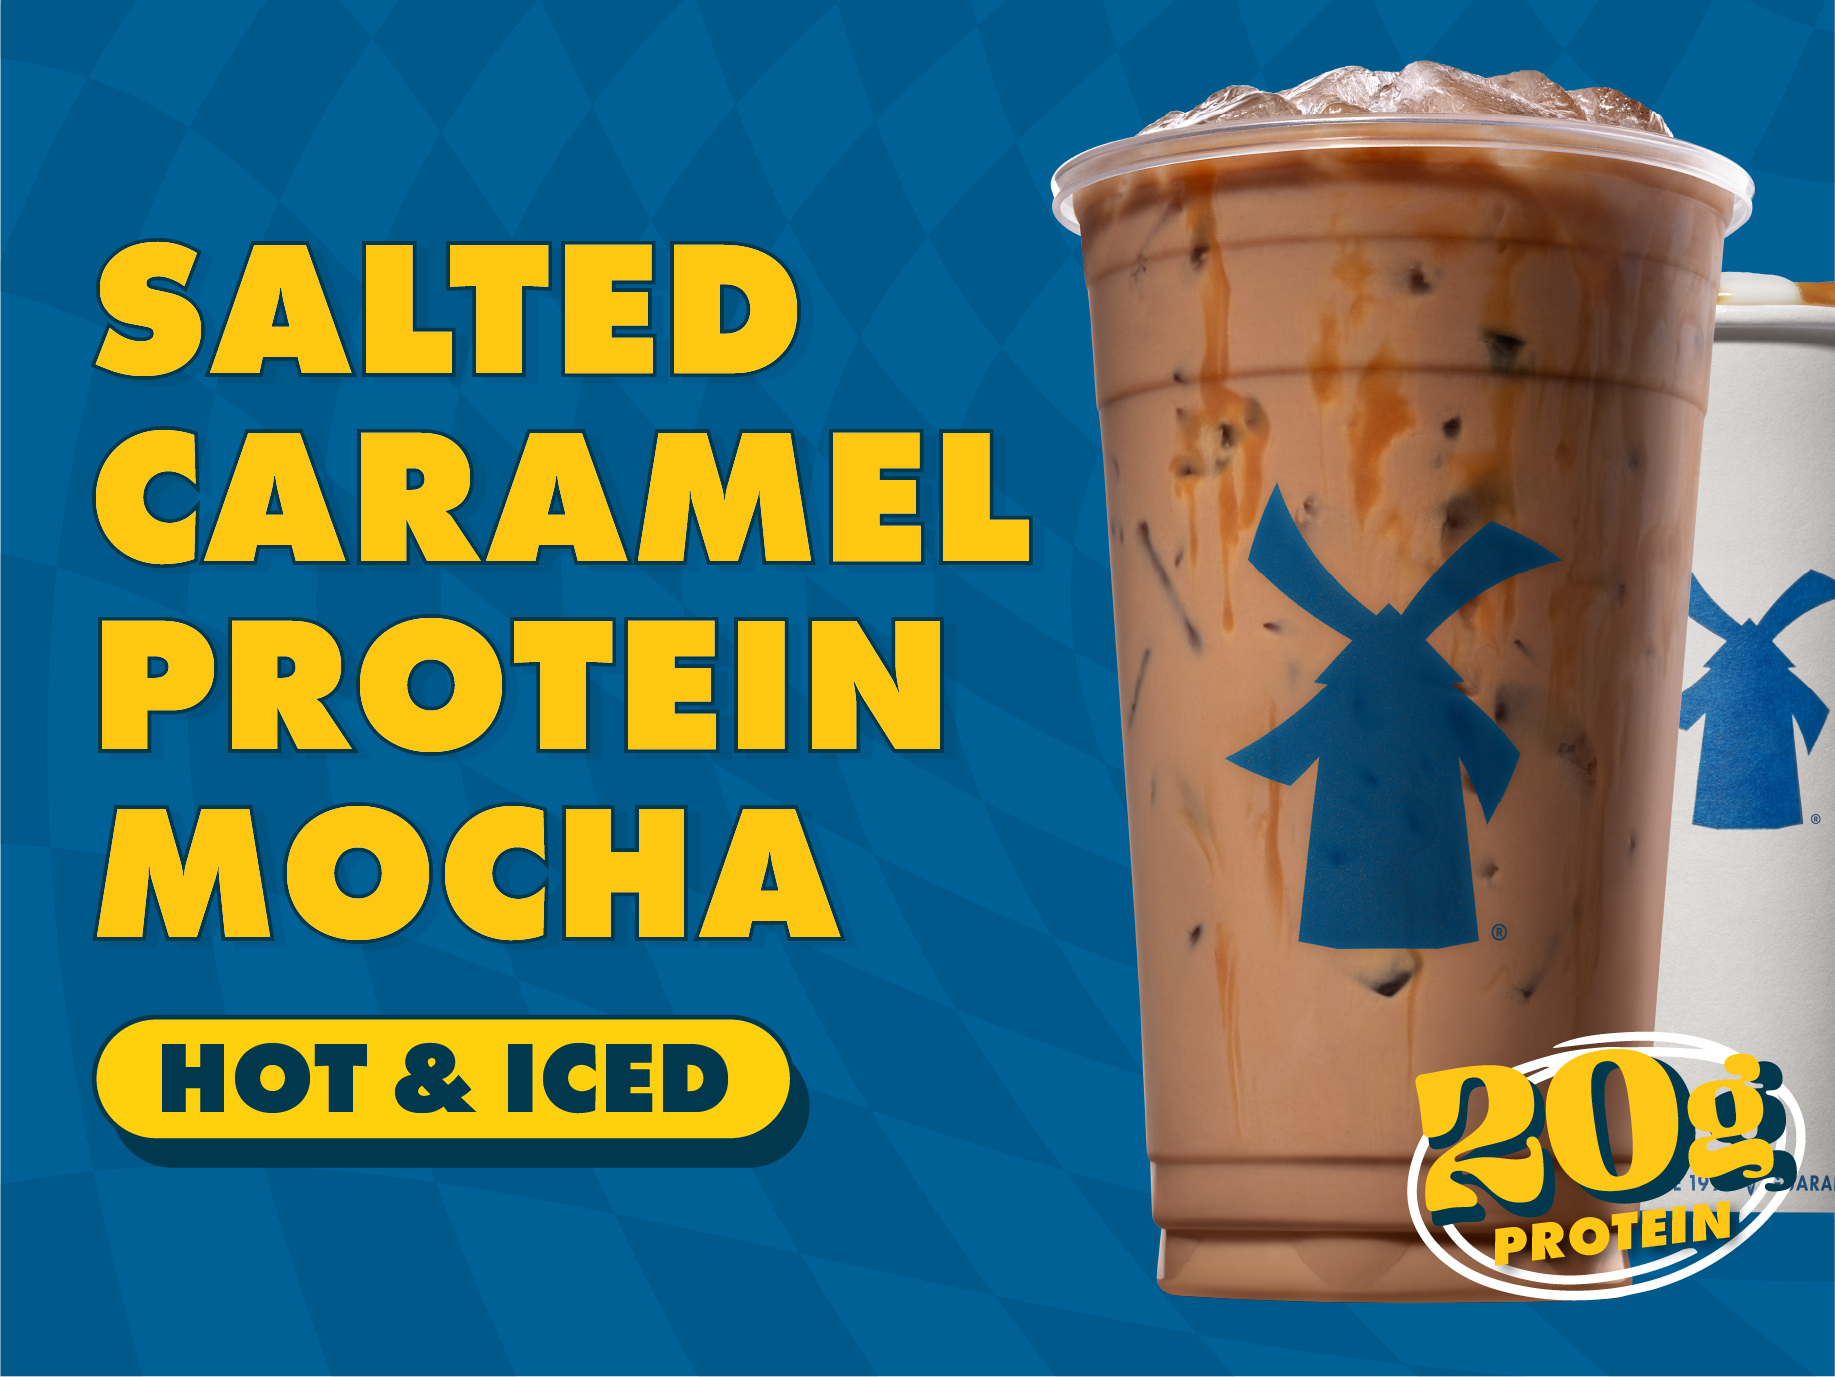 Salted caramel, chocolate, protein milk, caramel drizzle